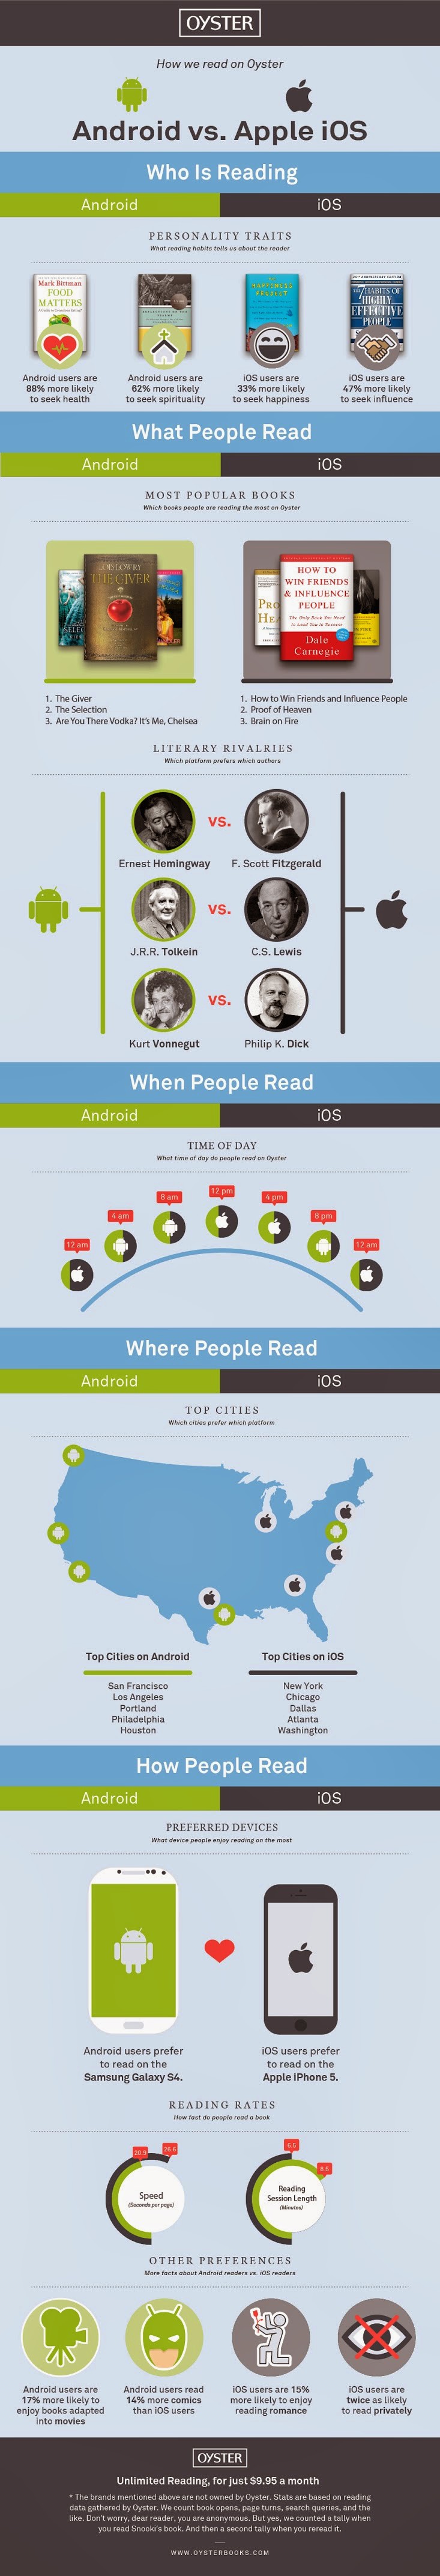 iOS-Android-Infographic-Oyster.jpg